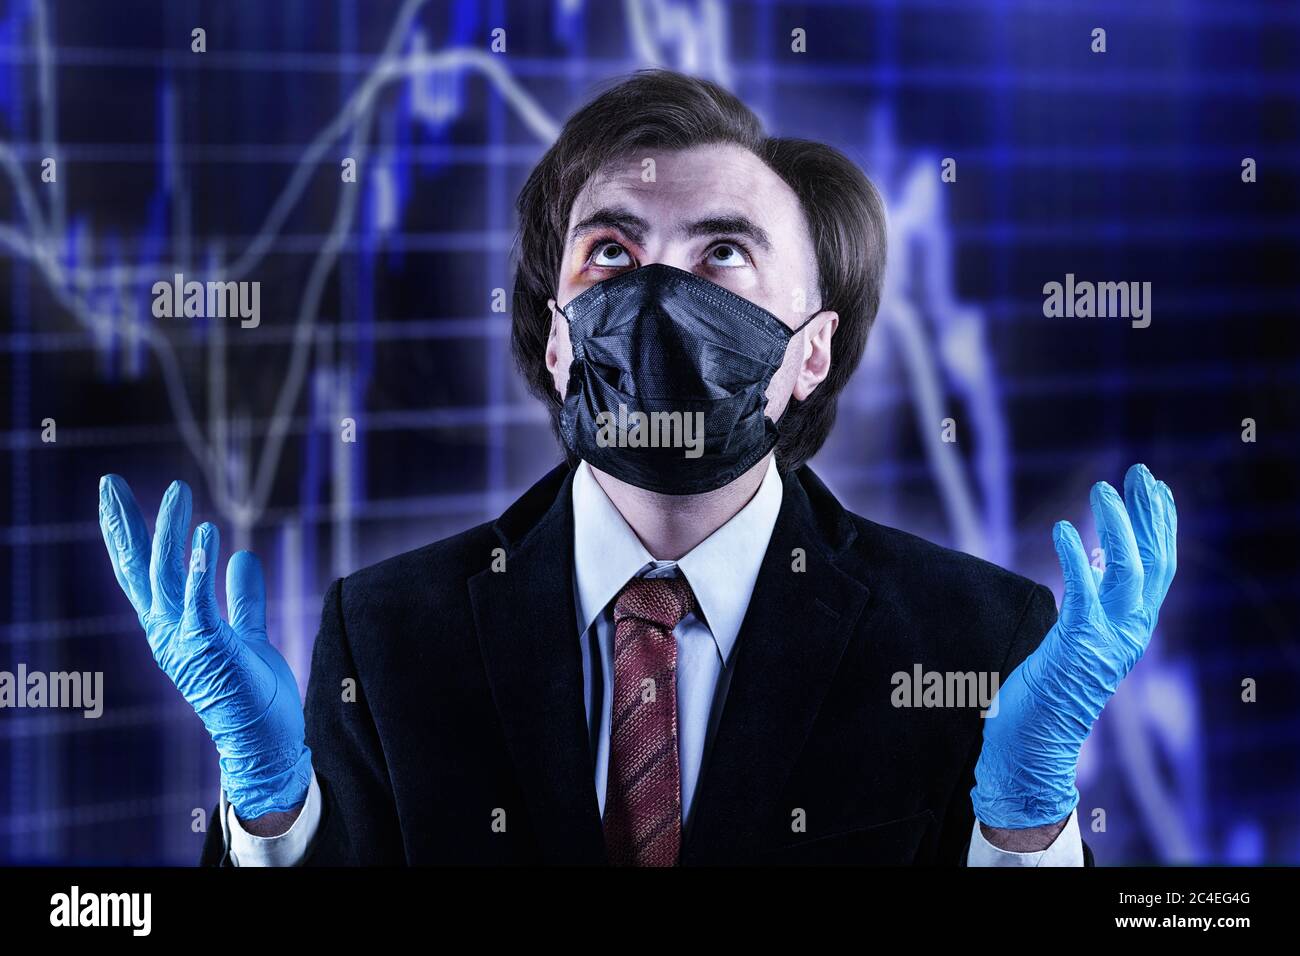 Businessman with a bruise on his face in an official suit, medical mask and gloves, raising his eyes to heaven against the blurred stock chart. Crisis Stock Photo